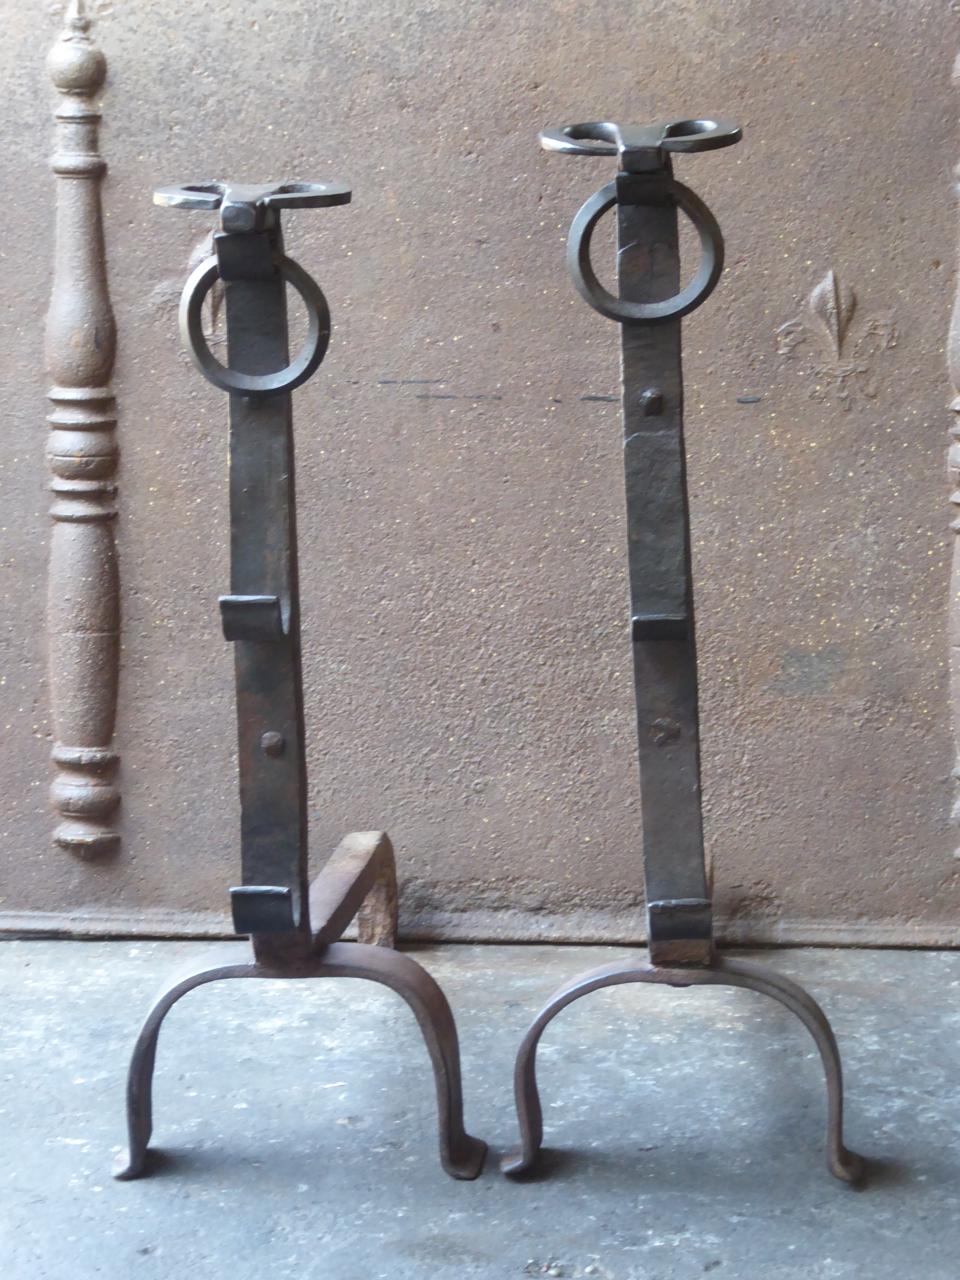 19th century French Gothic style andirons. The tops of the andirons consist of bull heads which is characteristic for this type of andirons. In France these andirons are called 'landiers'. They are made of wrought iron. The condition is